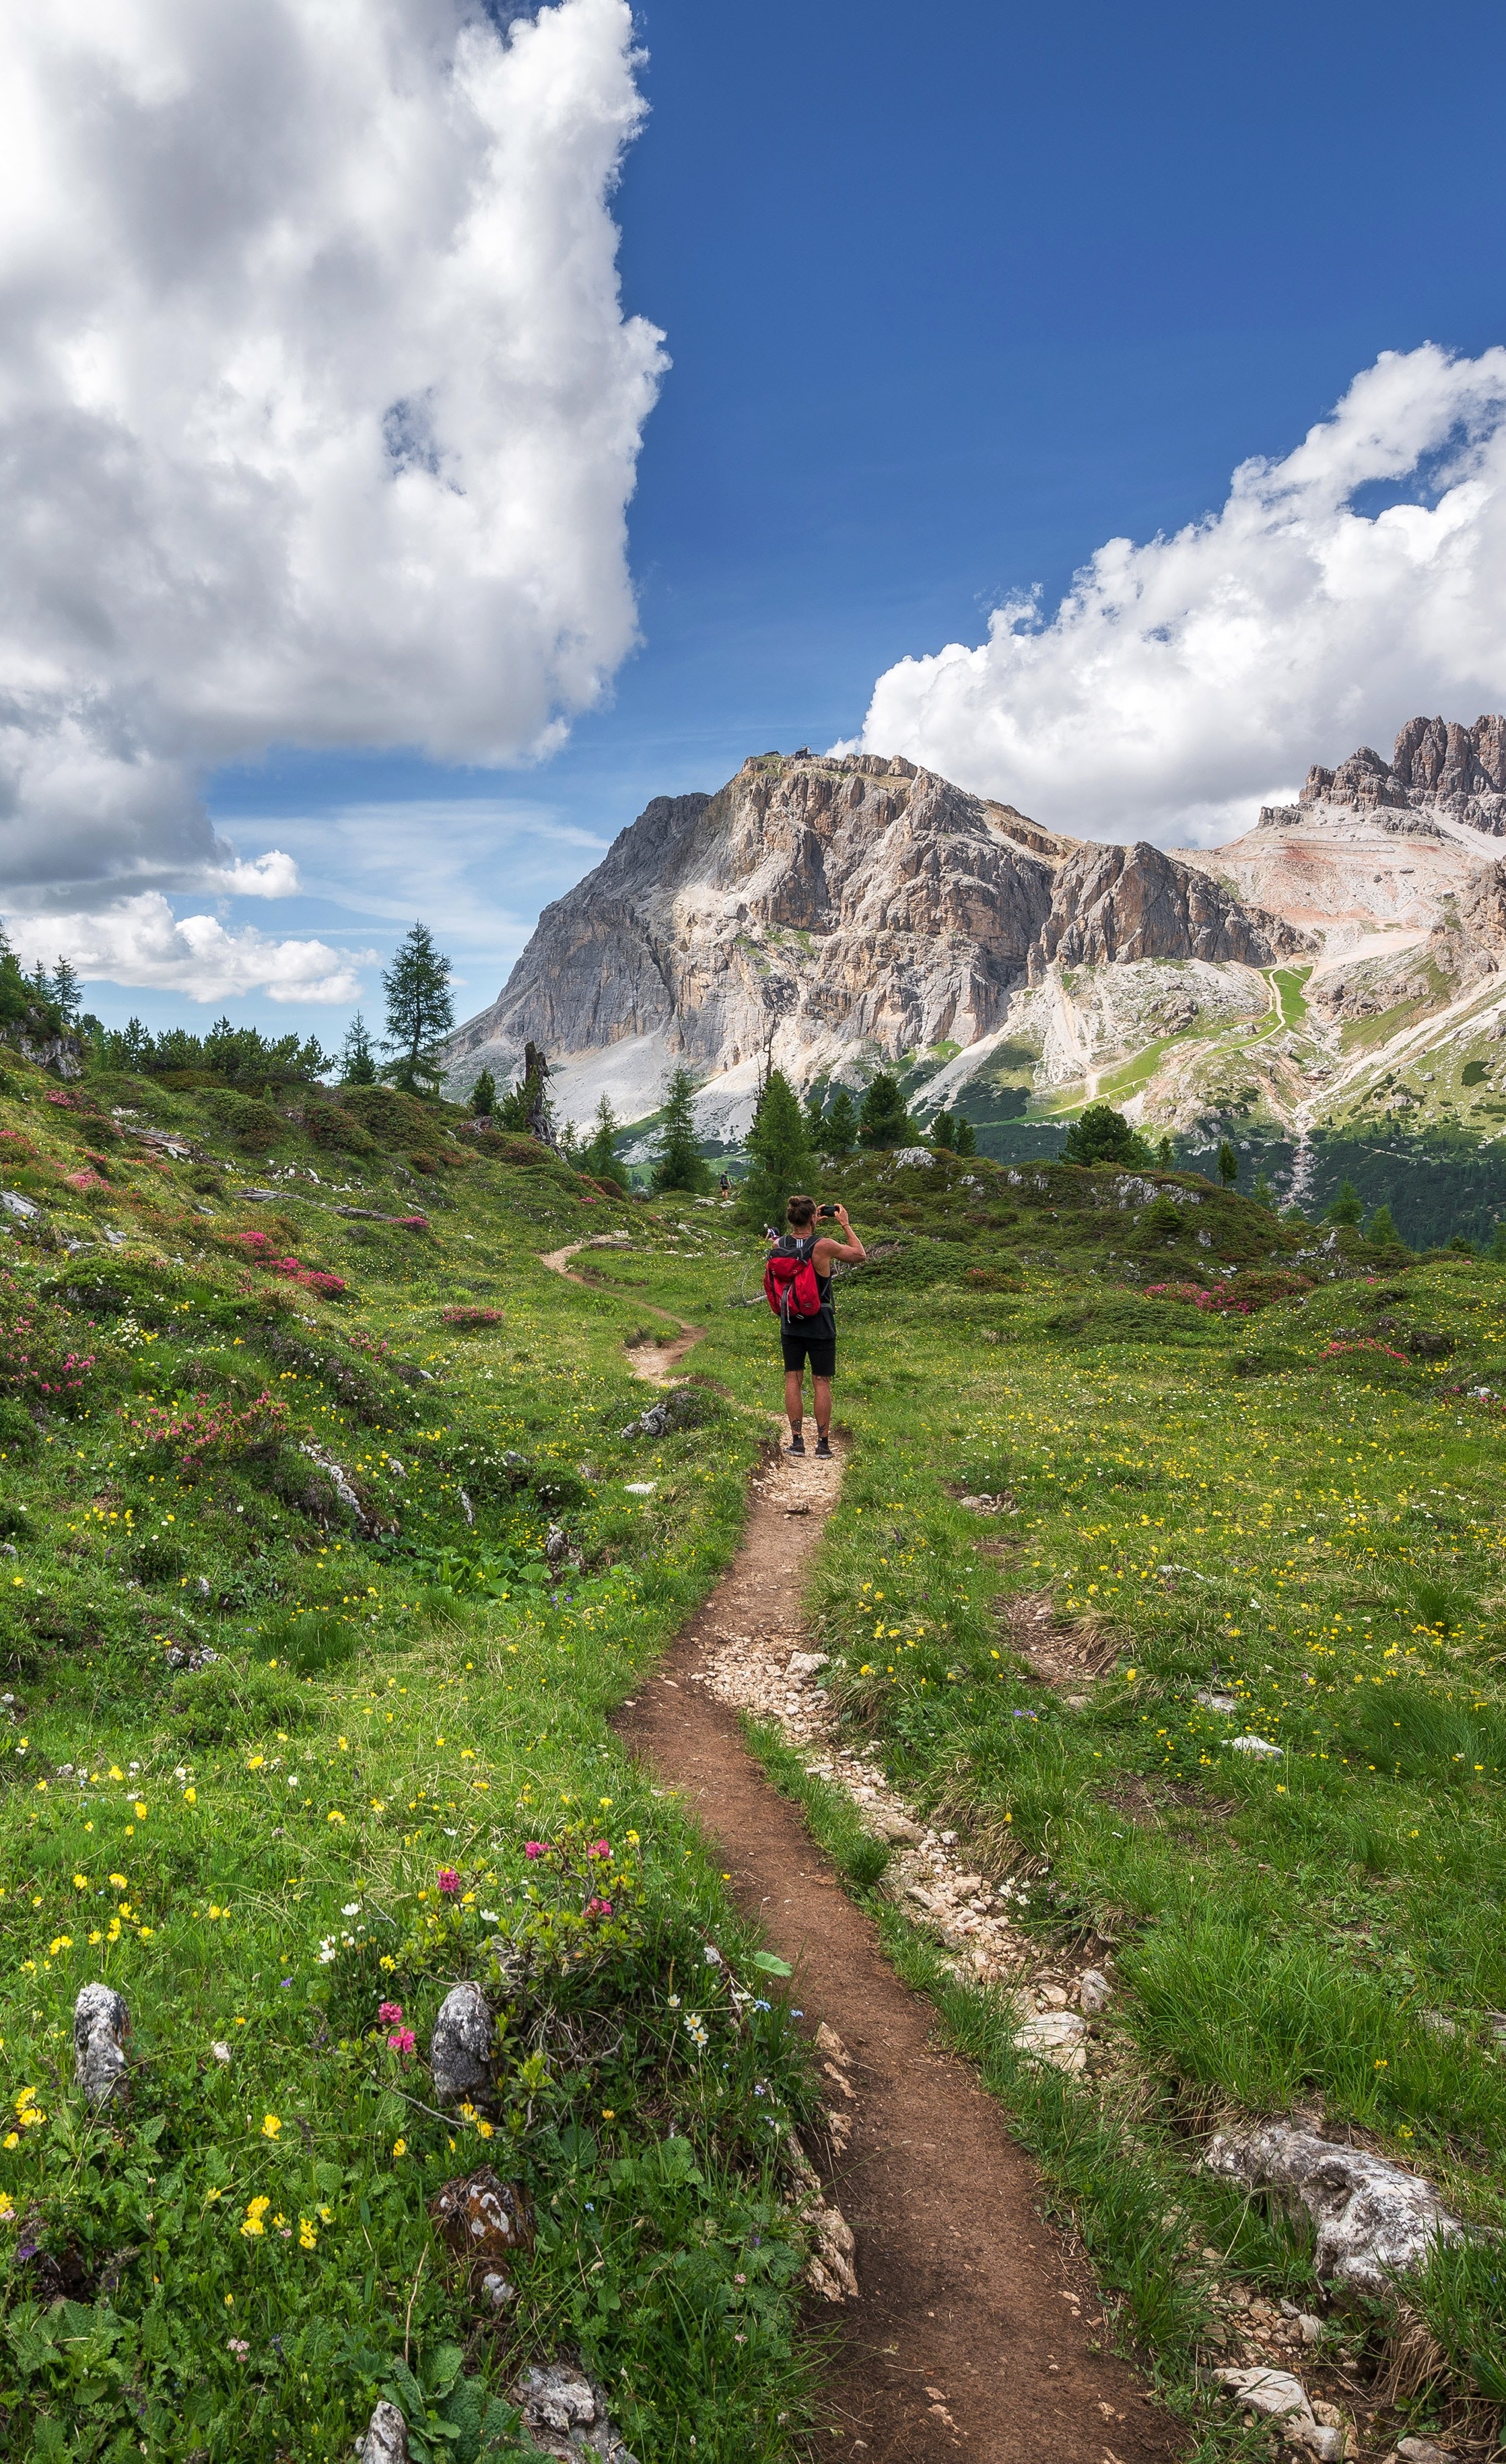 young-hiker-with-man-bun-with-back-turned-on-dirt-trail-in-green-valley-of-wildflowers-taking-photo-of-mountains-in-distance